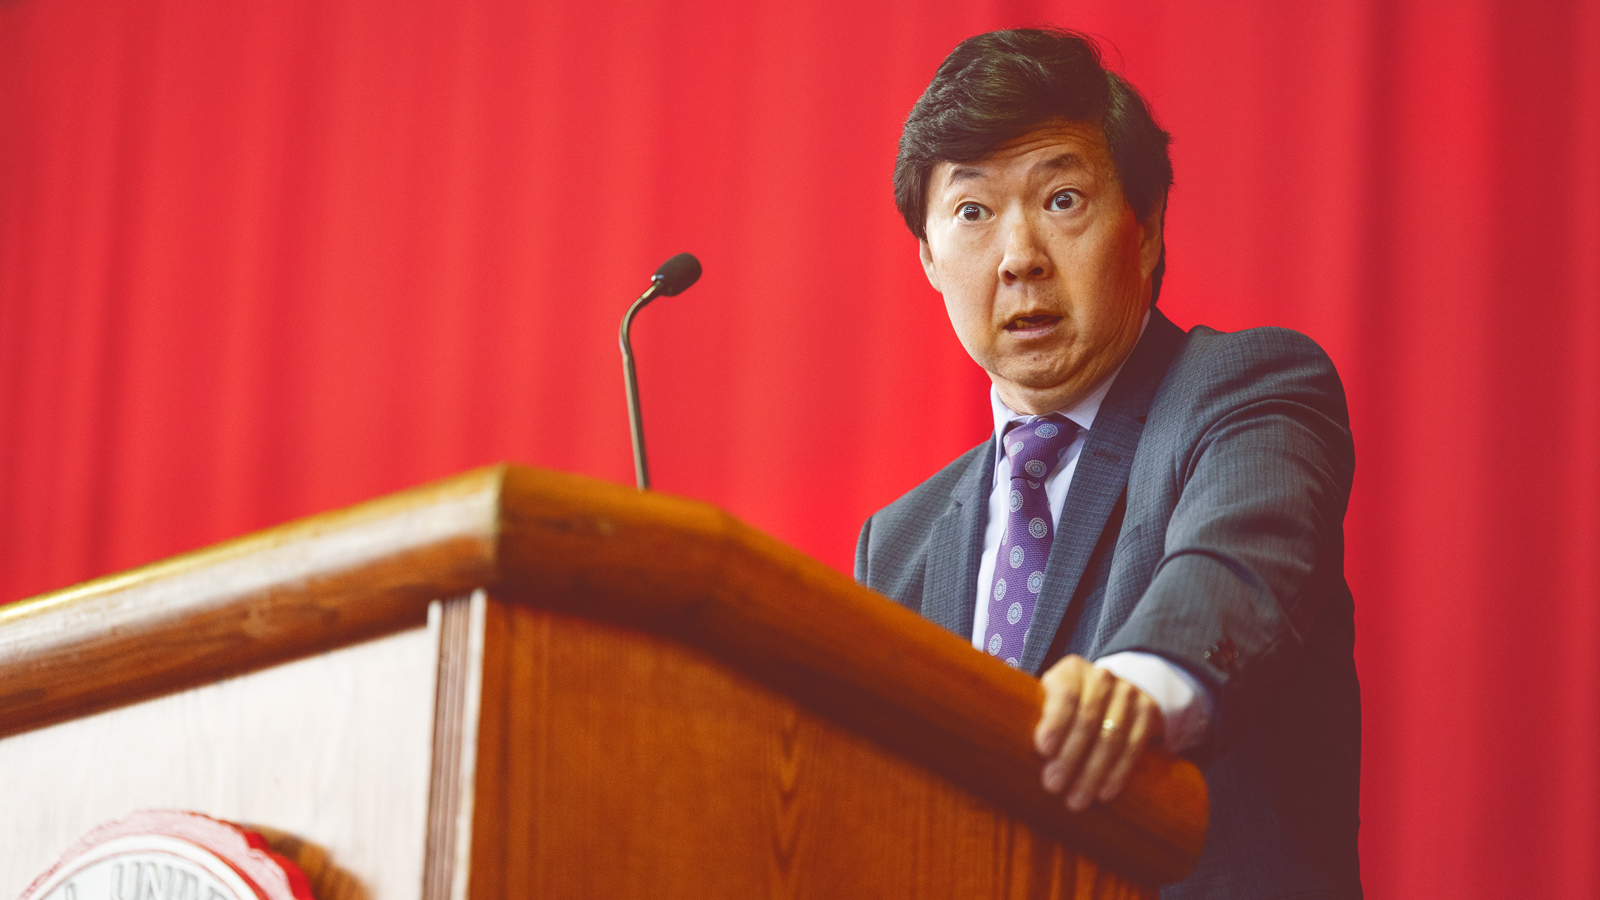 Actor and comedian Ken Jeong speaks at Senior Convocation in Barton Hall